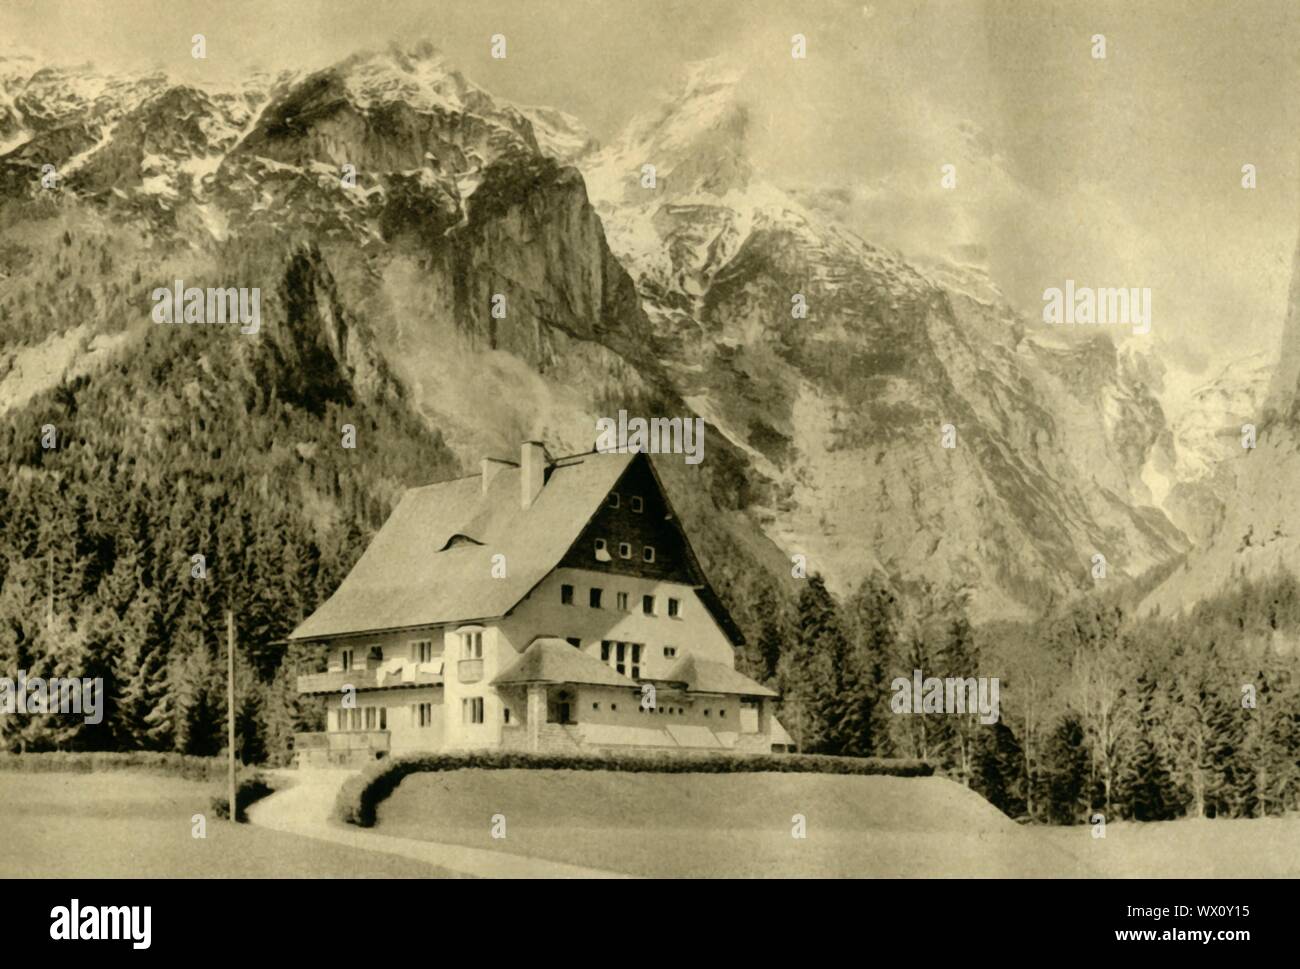 Hinterstoder, Upper Austria, c1935. House with typical steeply pitched roof in the village of Hinterstoder which is surrounded by the mountains of the Totes Gebirge range. The angle of the roof is designed to make it more difficult for snow to settle. From &quot;&#xd6;sterreich - Land Und Volk&quot;, (Austria, Land and People). [R. Lechner (Wilhelm M&#xfc;ller), Vienna, c1935] Stock Photo